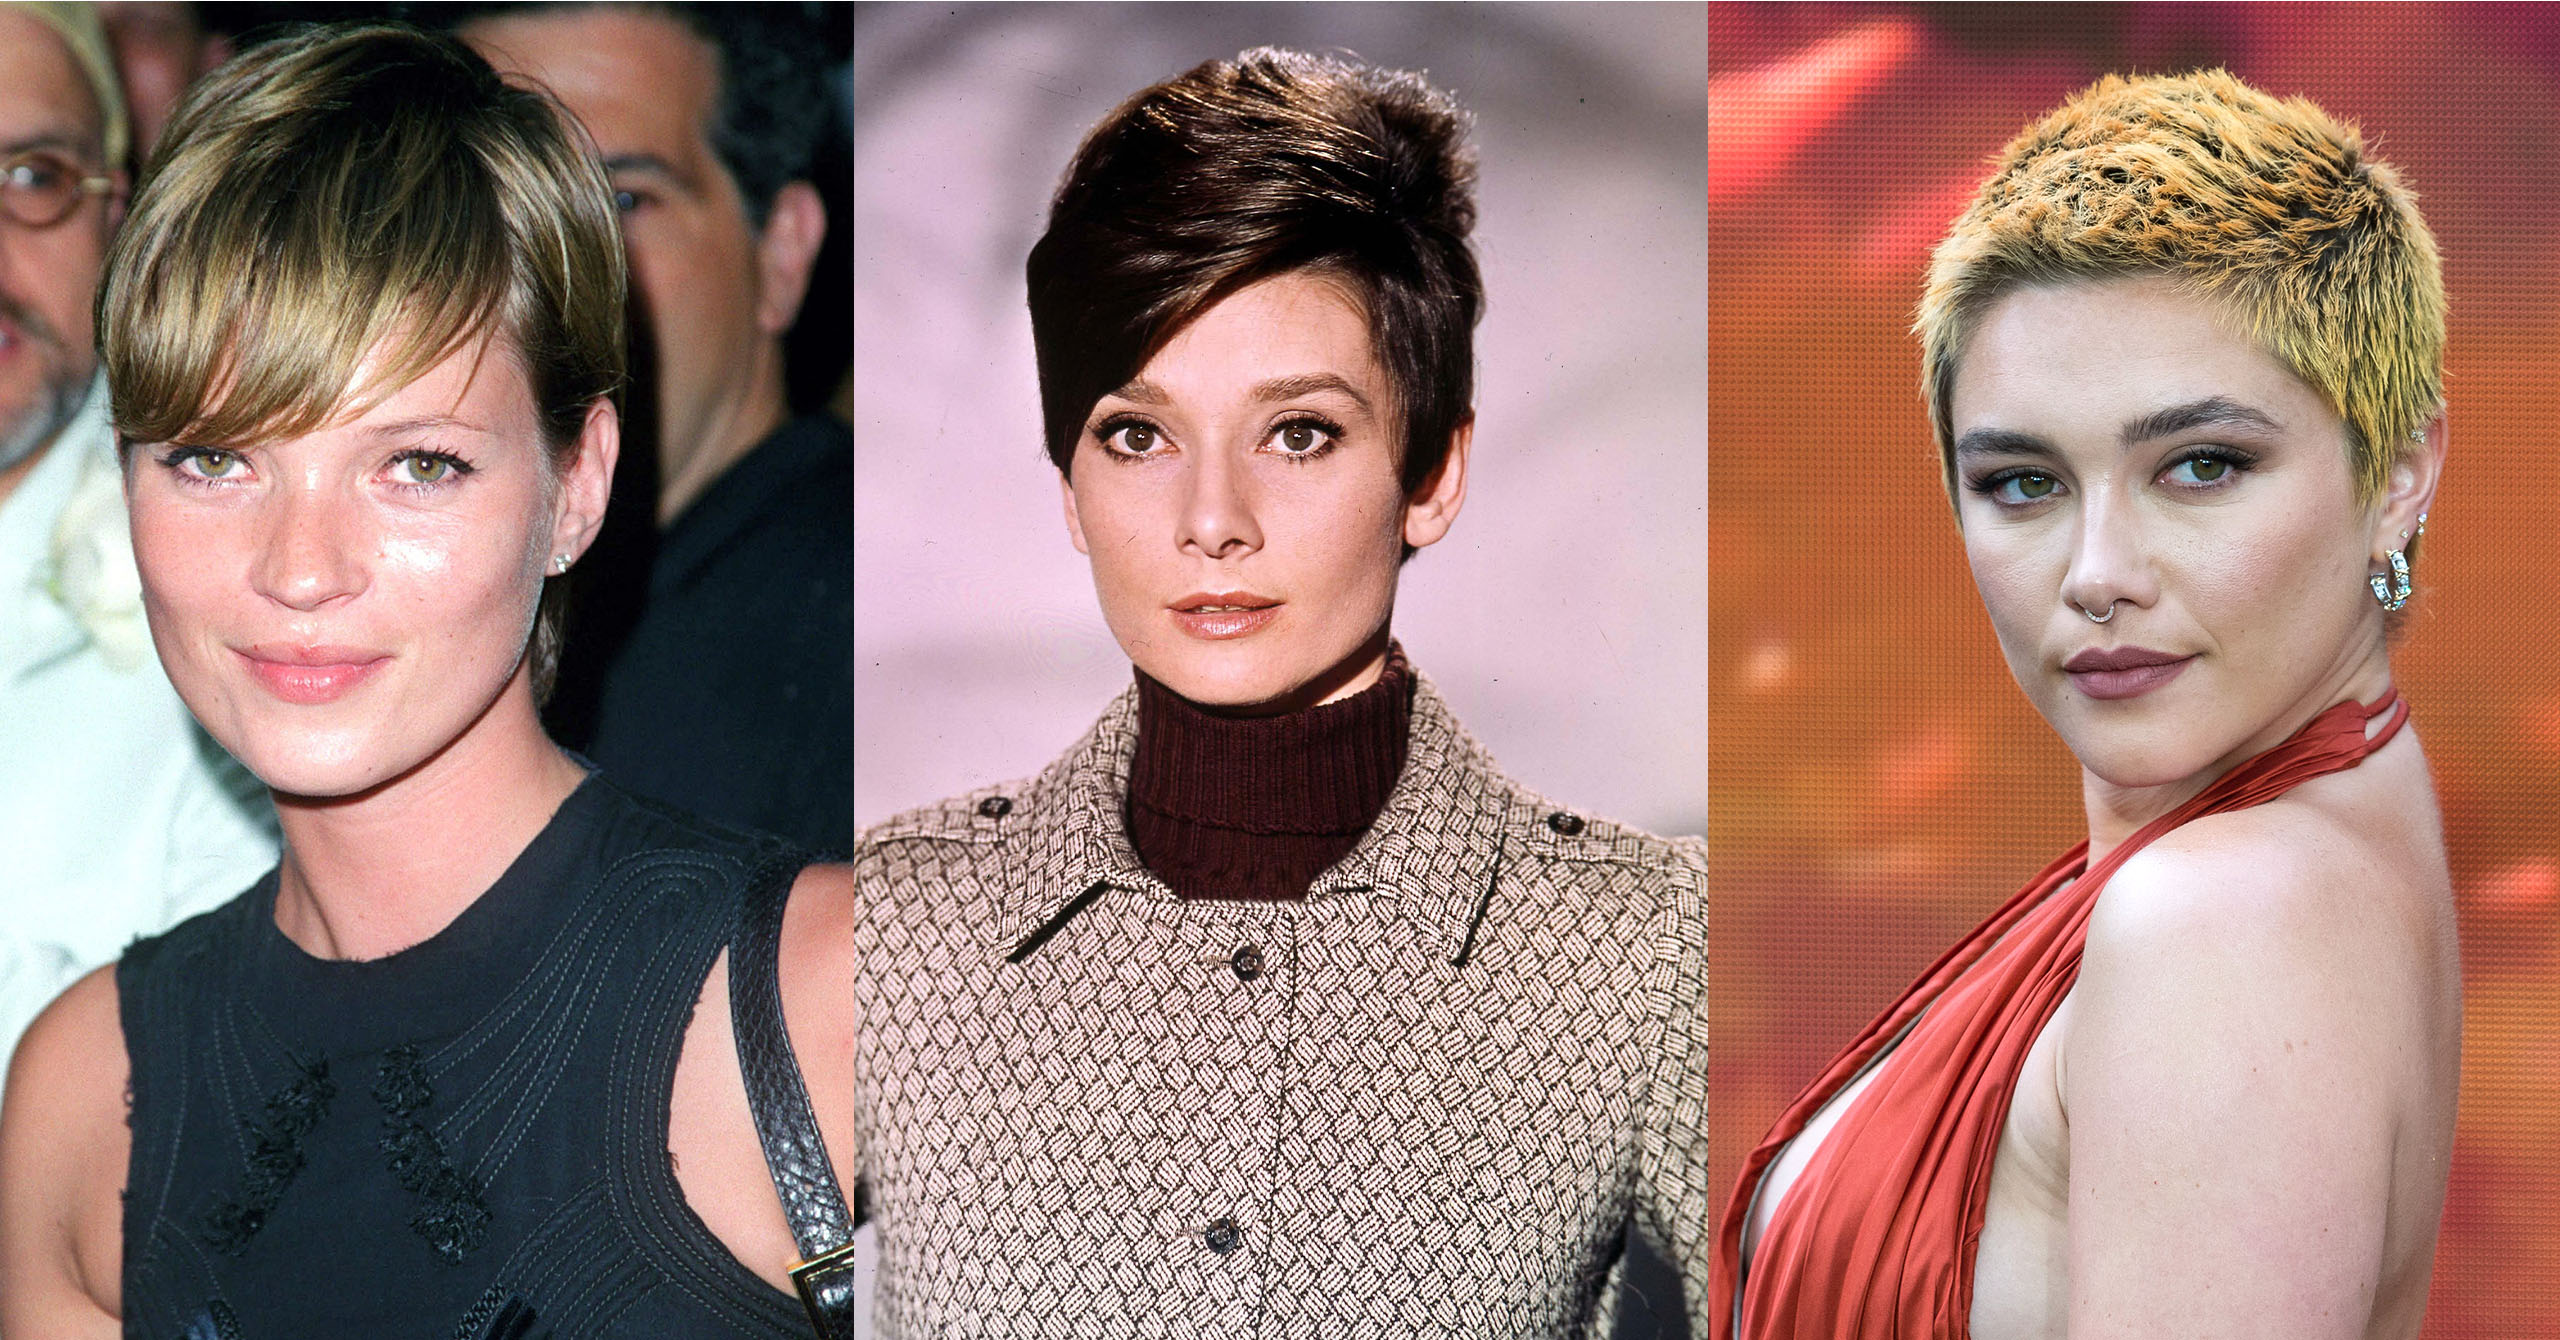 The Best Pixie Cuts To Inspire Your New Look